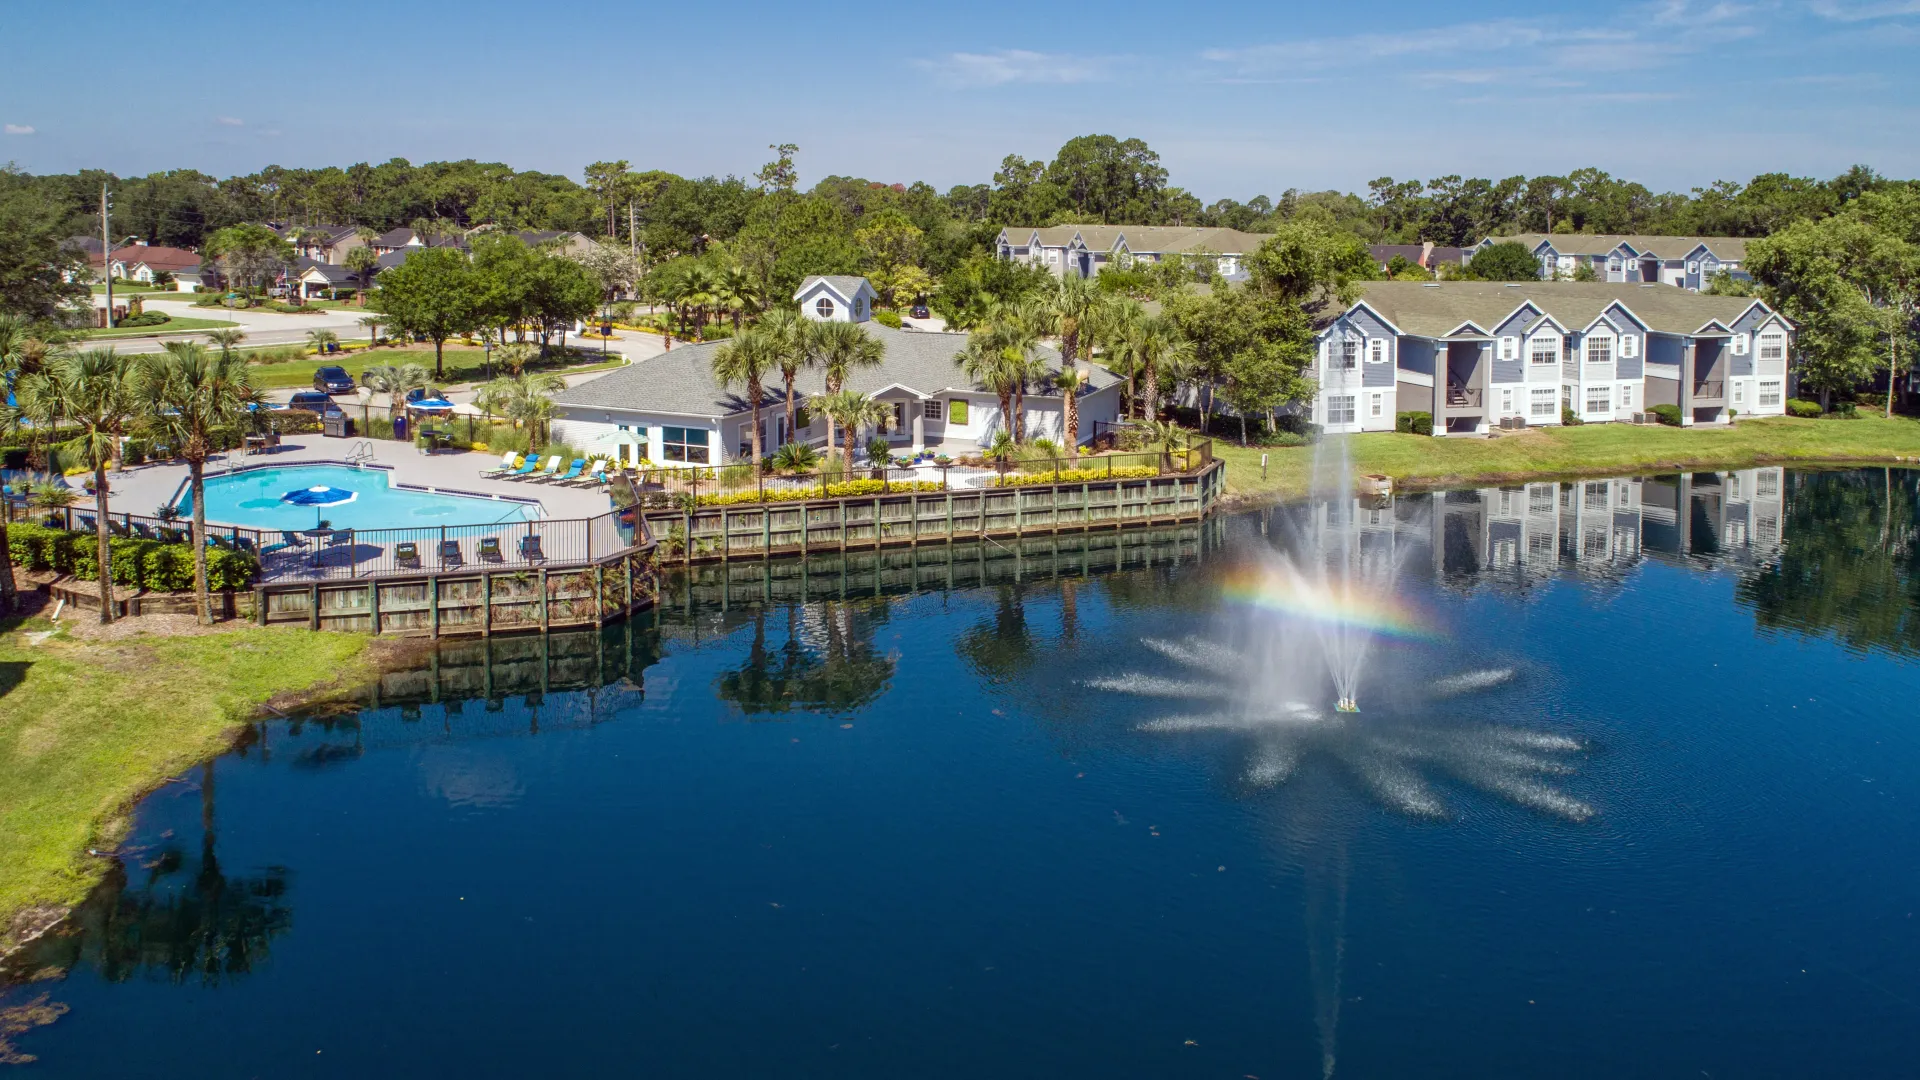 An aerial view of the community, showcasing apartment buildings, tall palm trees, the expansive sundeck, the shimmering pool, and a captivating lake with a spouting fountain highlighted by a perfectly formed rainbow.